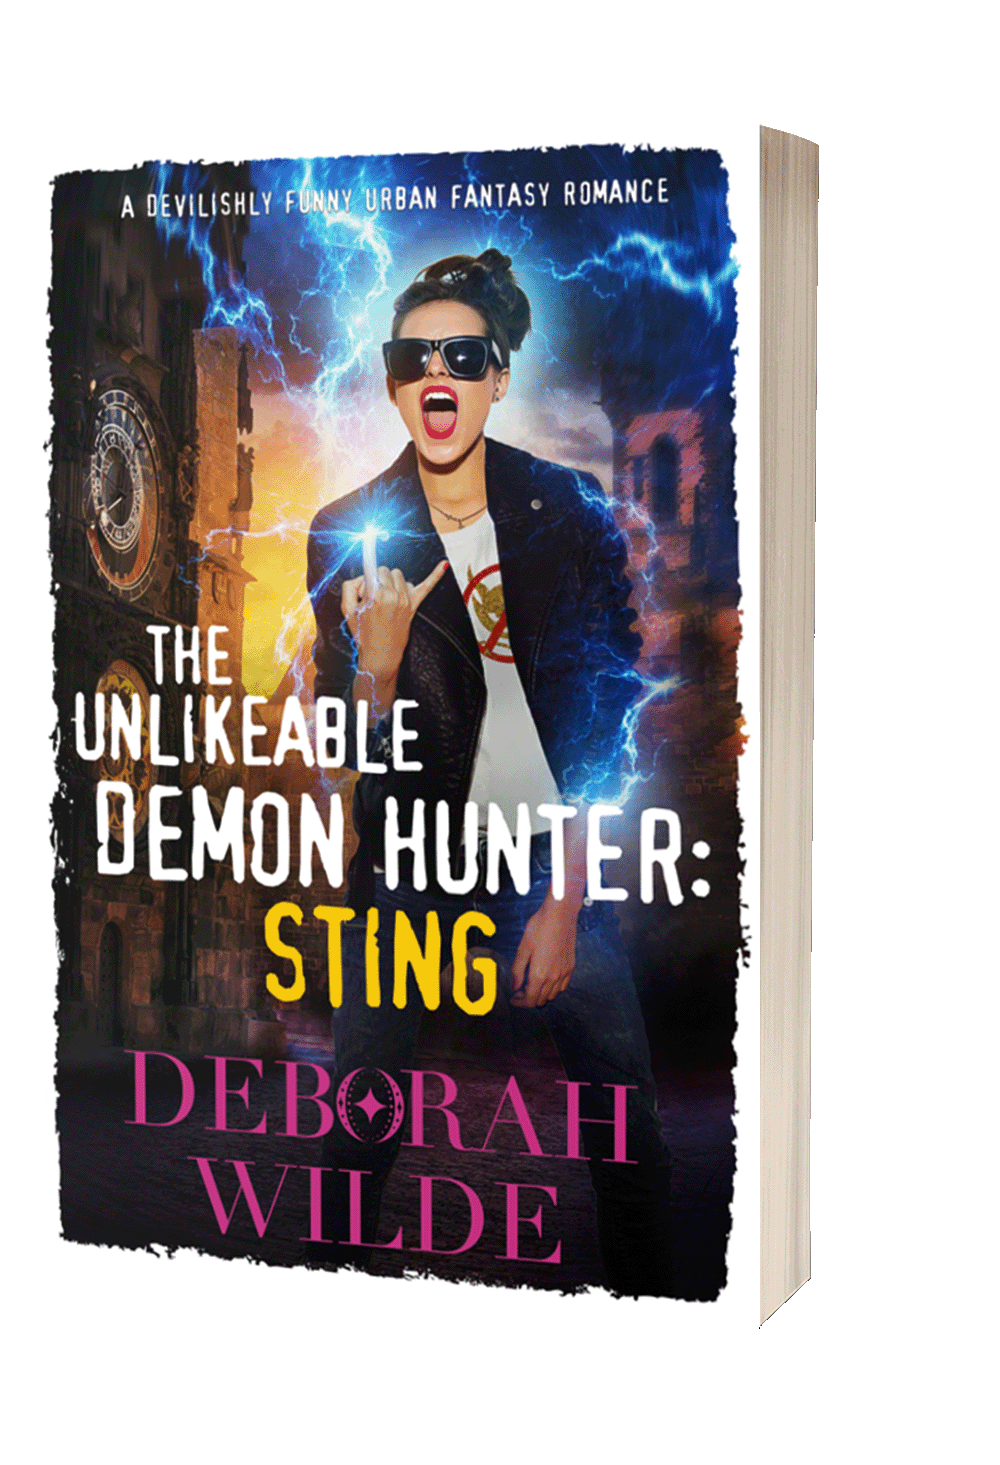 The Unlikeable Demon Hunter:Sting, a funny, sexy, urban fantasy from Deborah Wilde.